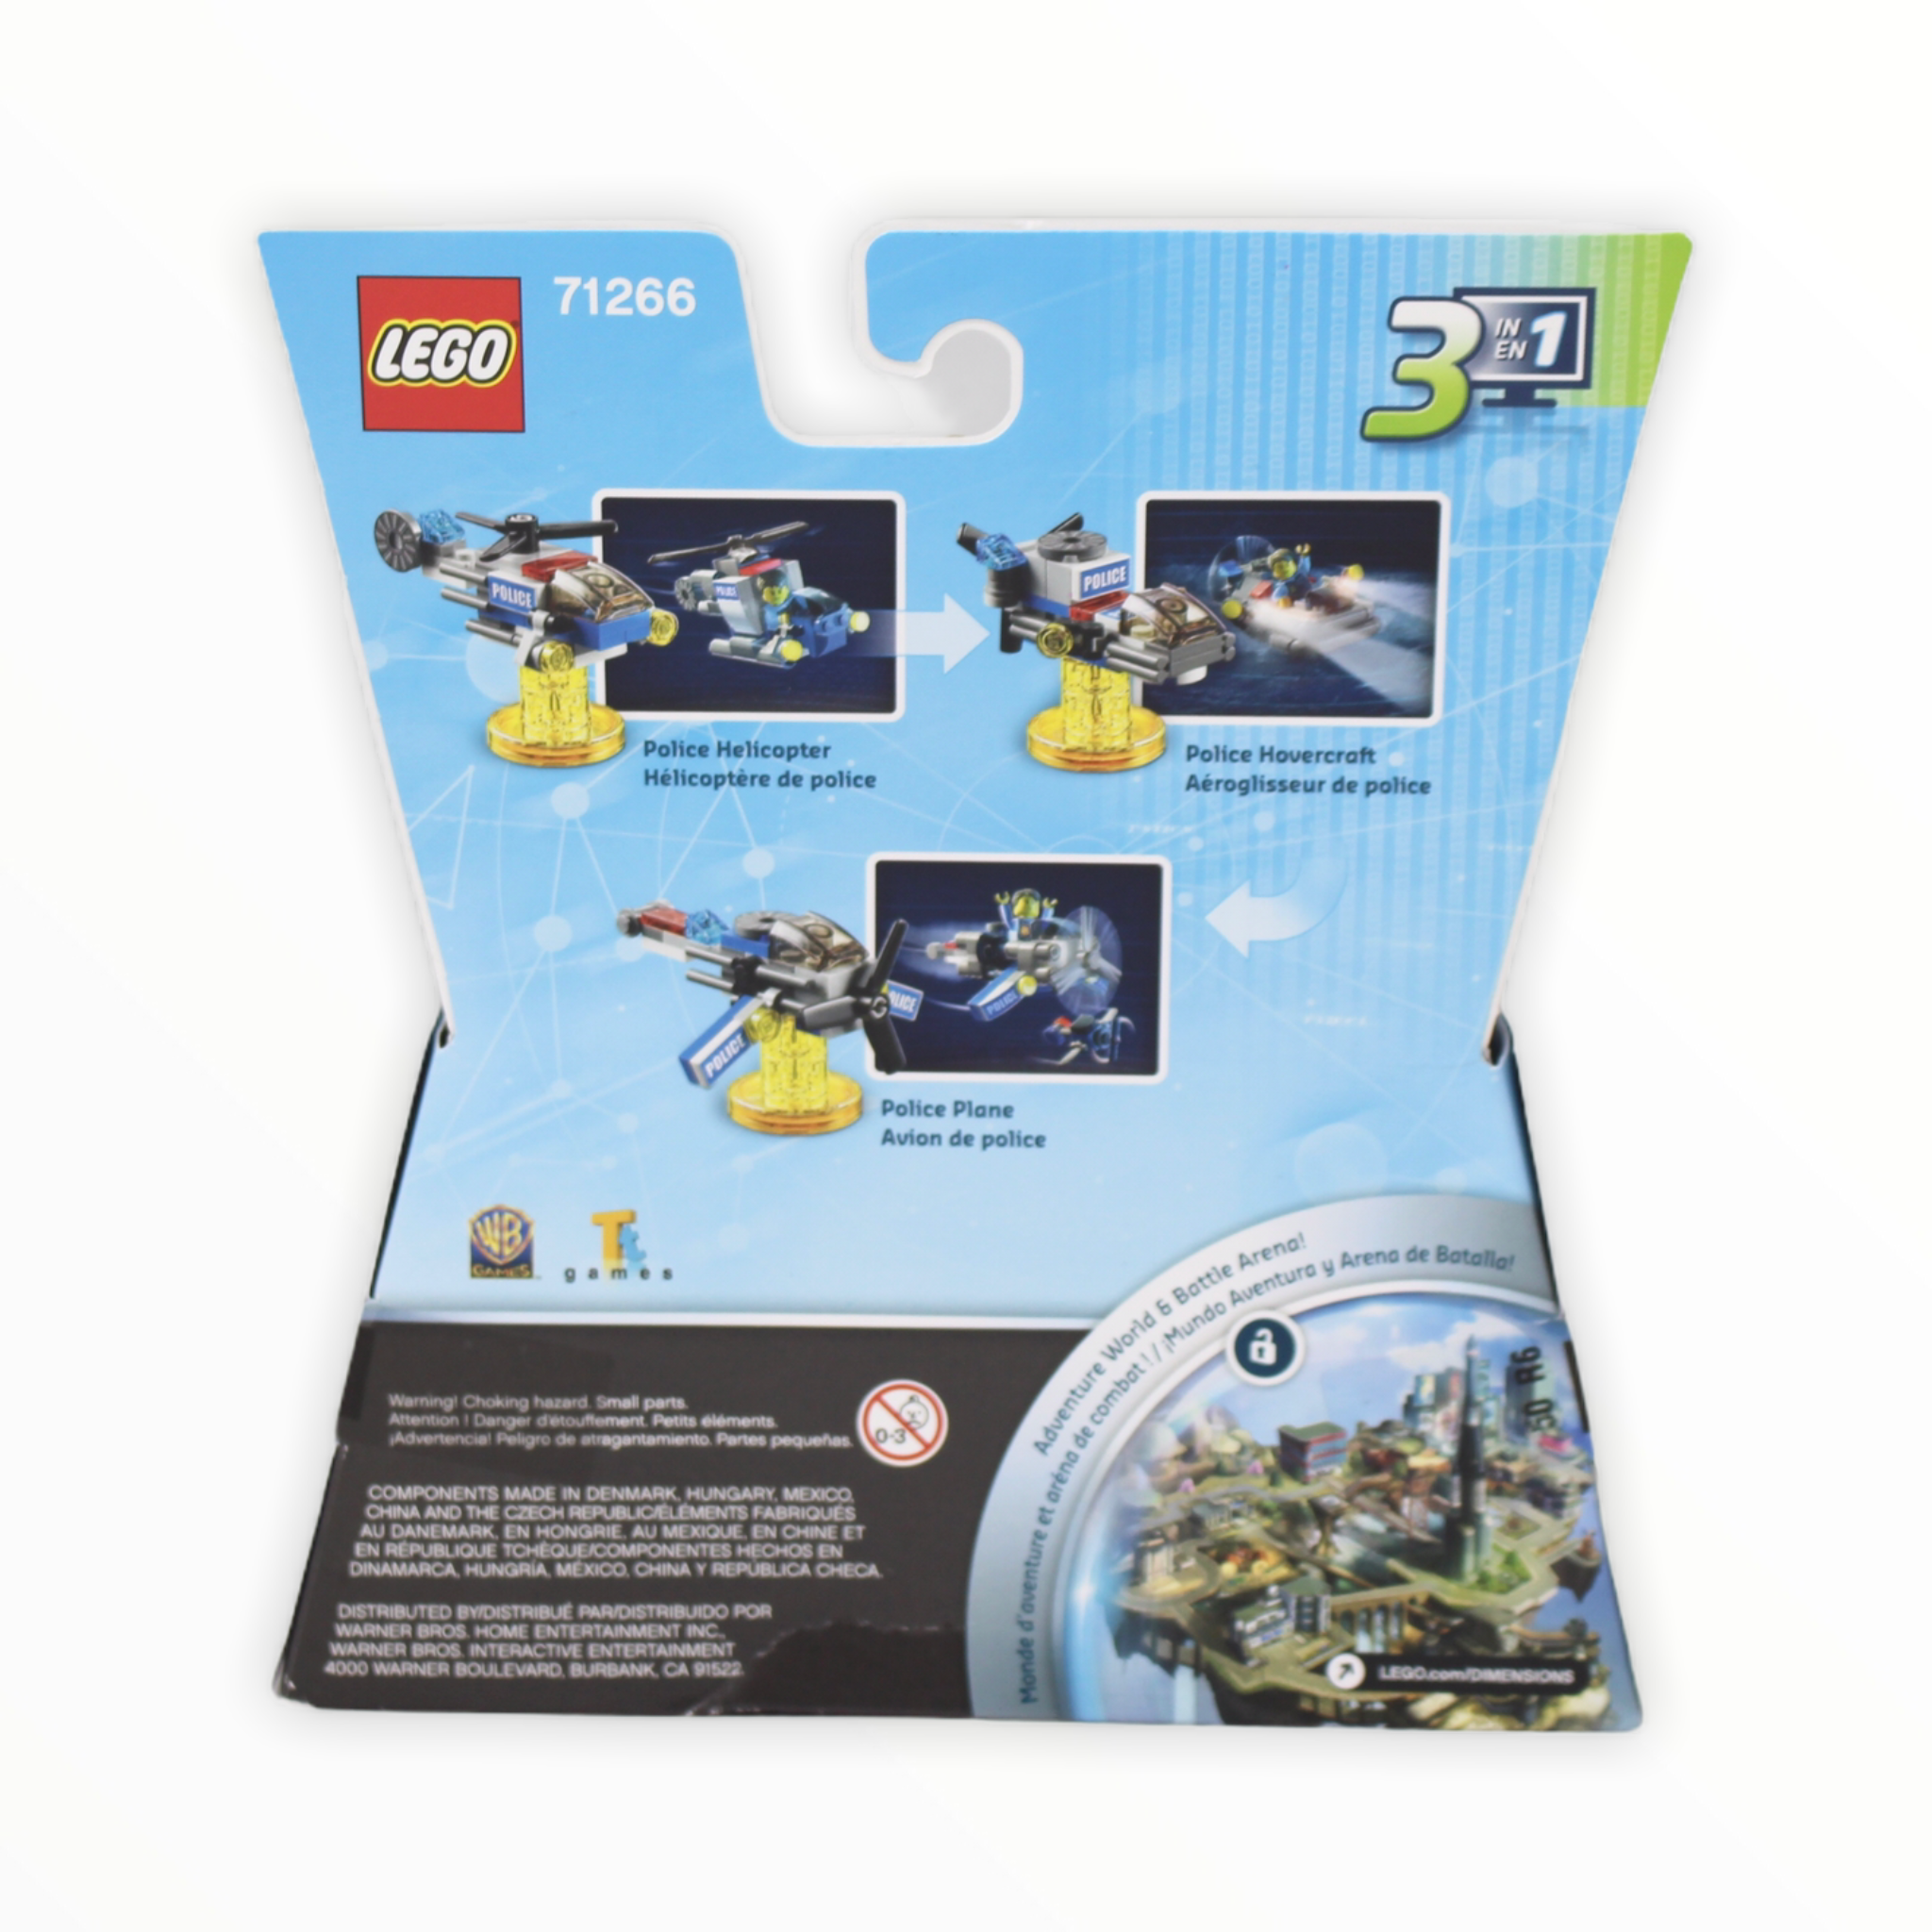 Retired Set 71266 LEGO Dimensions Fun Pack - Chase McCain and Police Helicopter